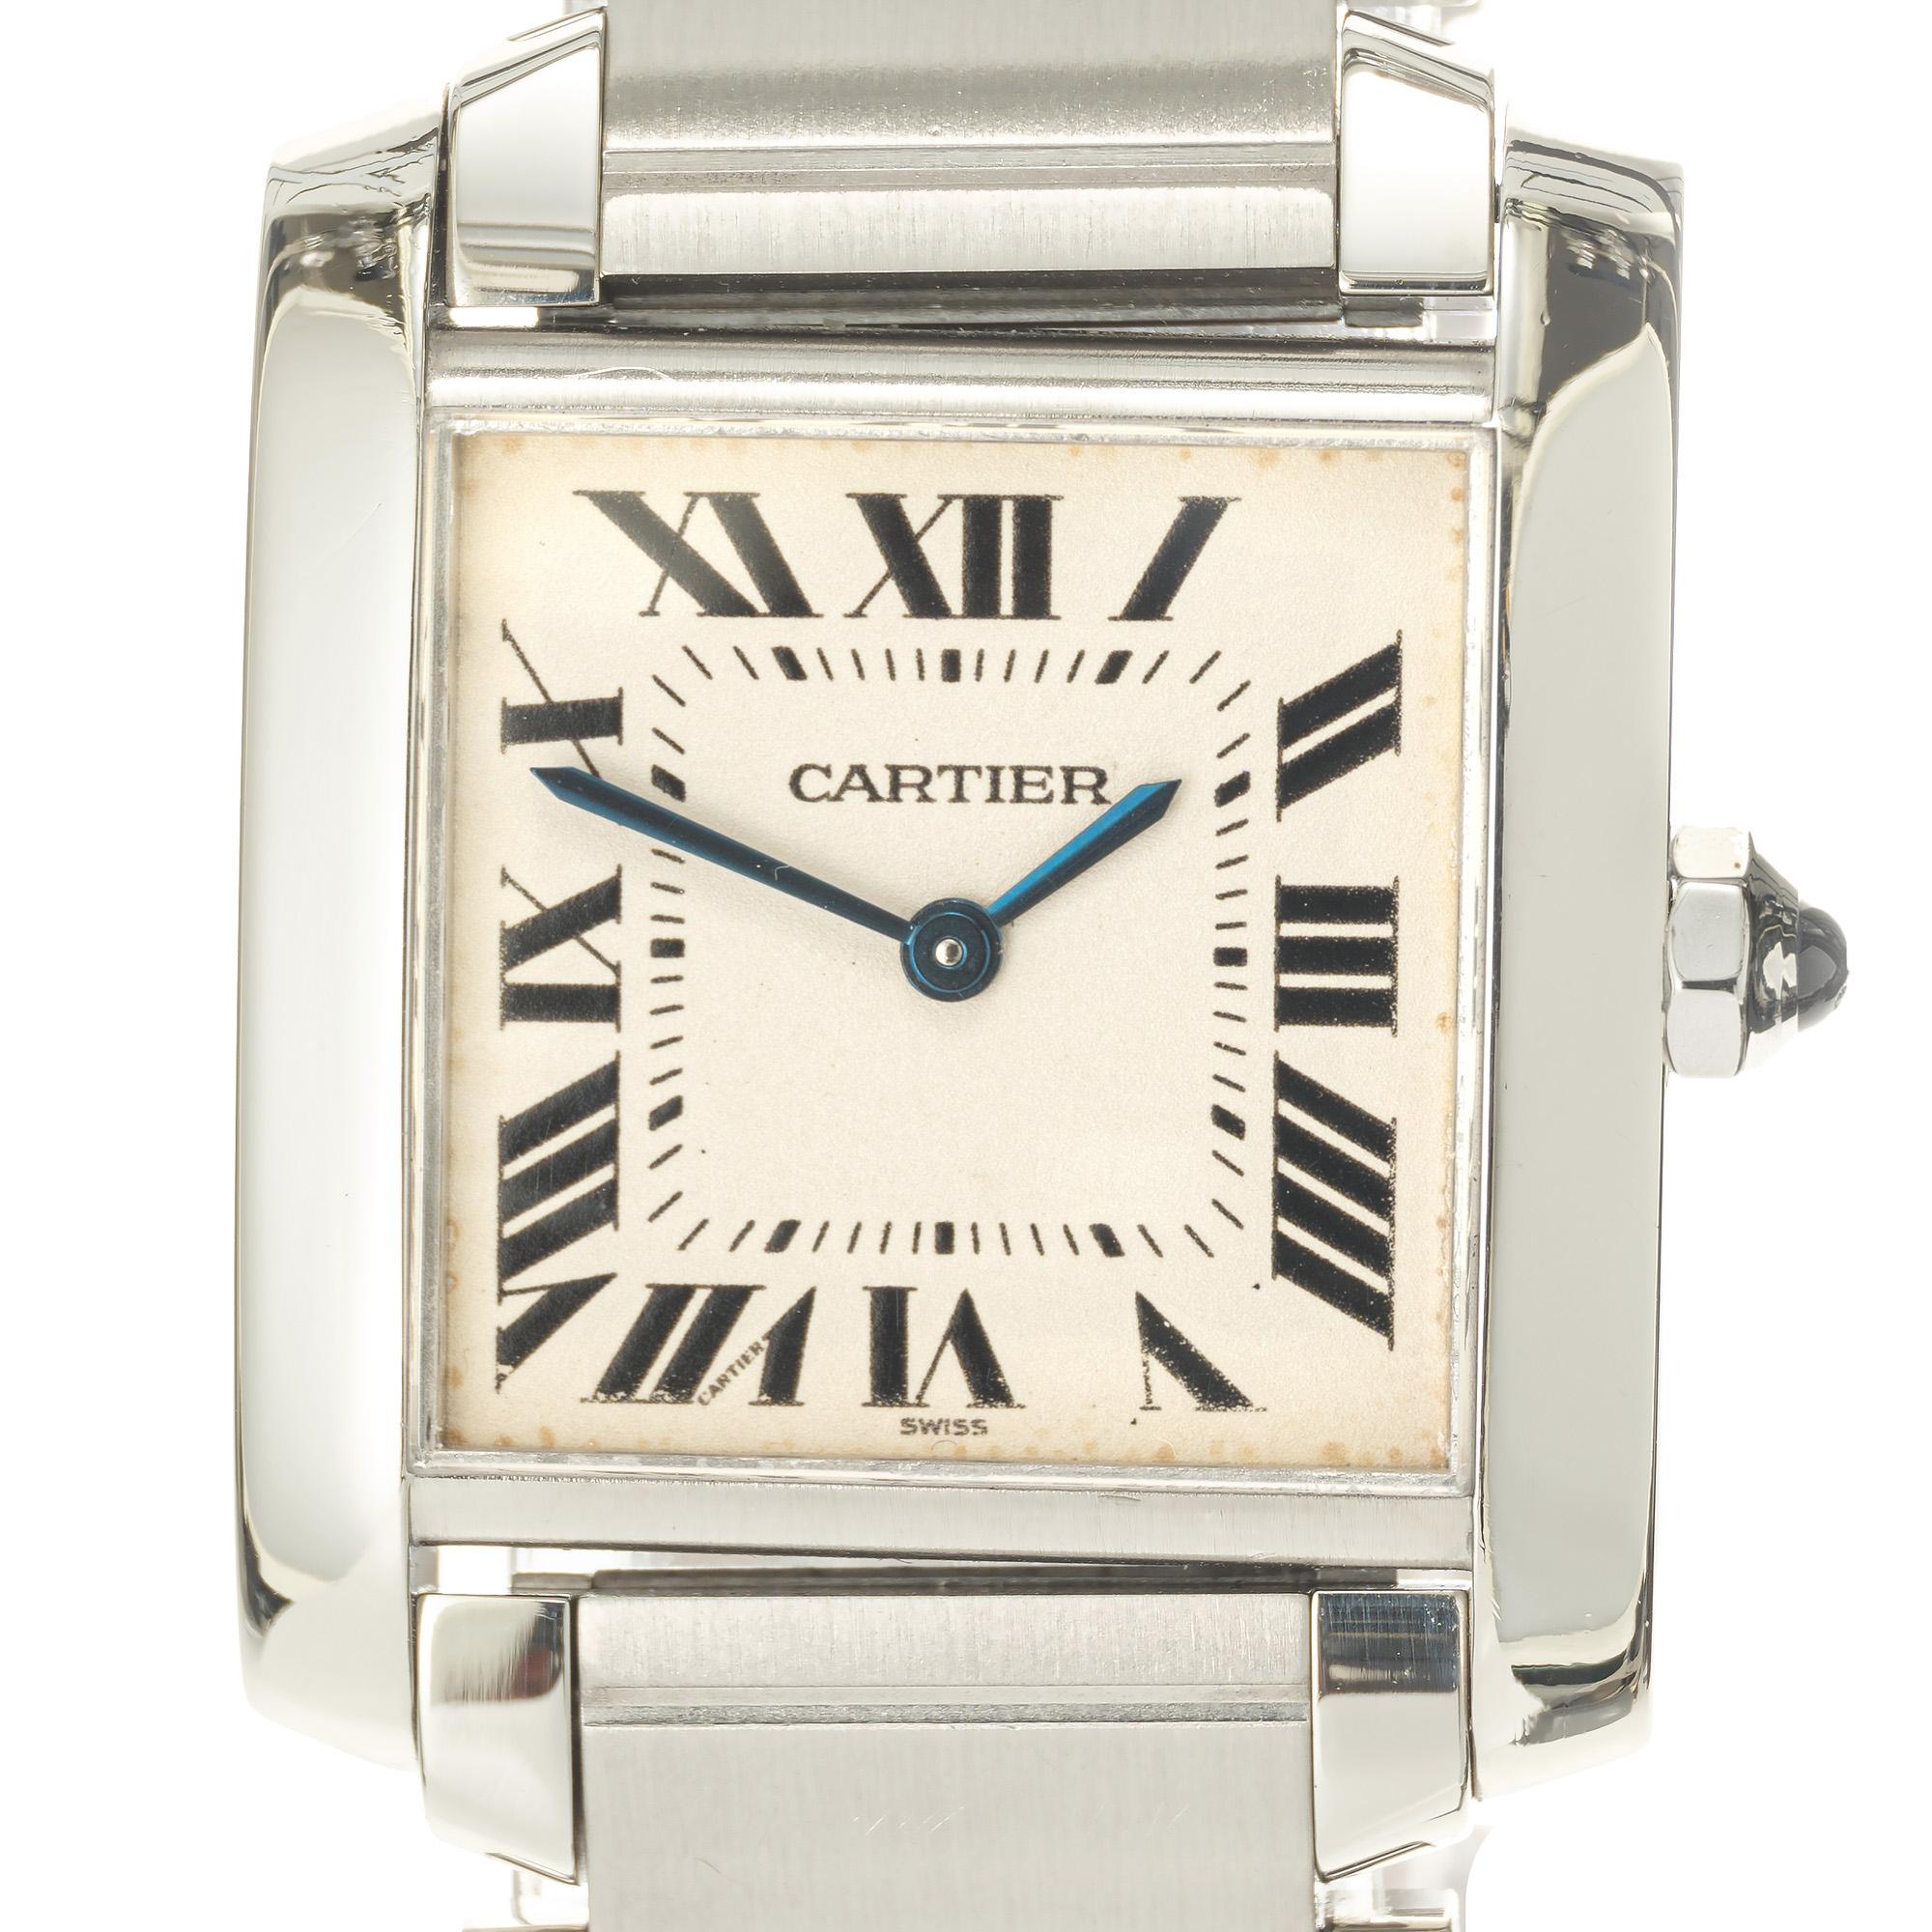 Cartier steel tank Francaise tank wristwatch. Ref 2301. Parchment dial with Roman Numerals. 7 inch band sizable. Recently serviced.  

Length: 30mm
Width: 25mm
Band width at case: 17.90mm
Case thickness: 5.87mm
Band: stainless steel
Crystal: